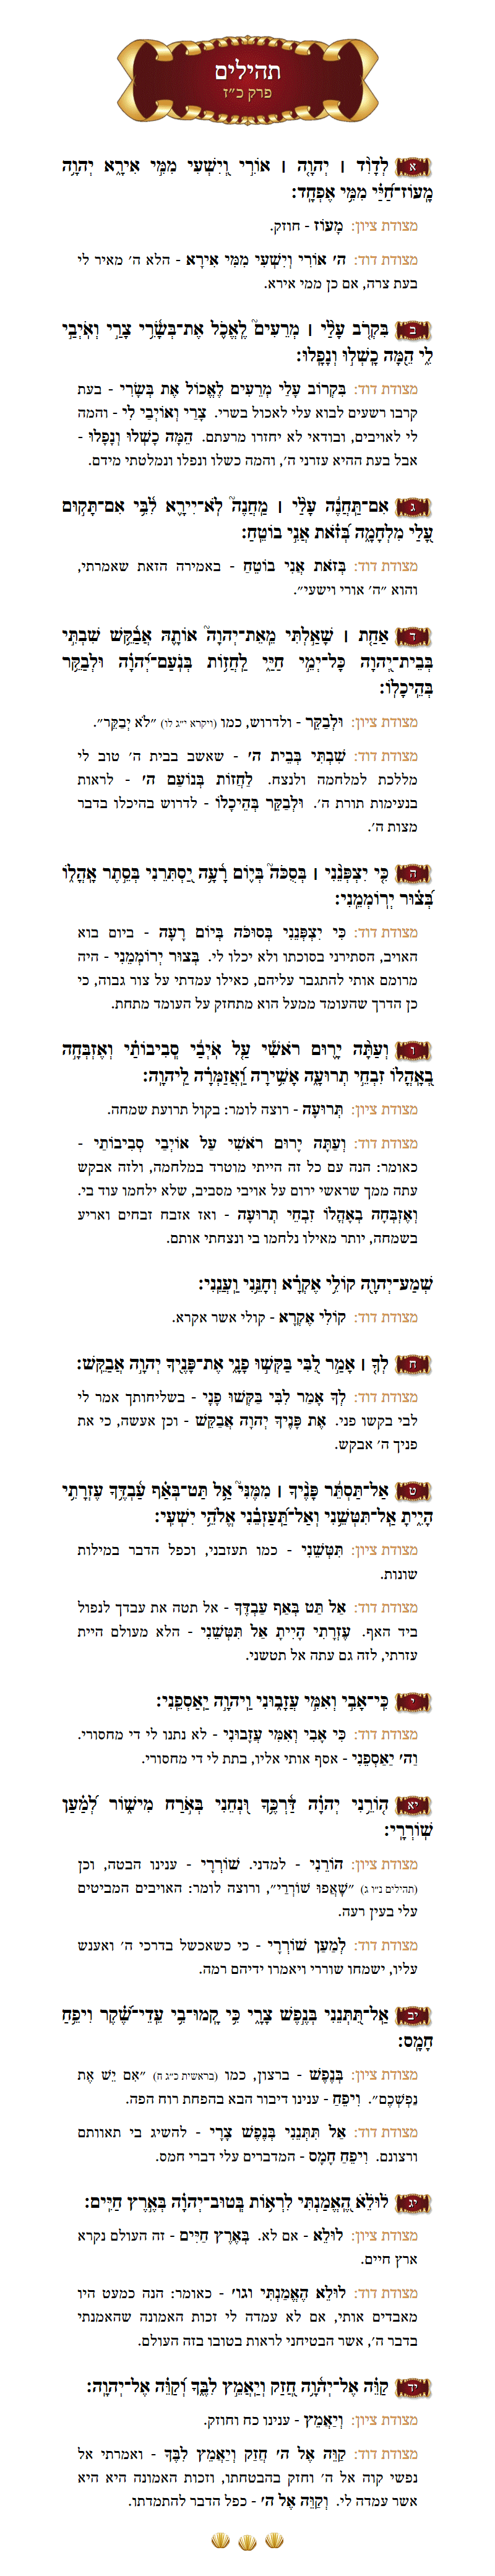 Sefer Tehillim Chapter 27 with commentary